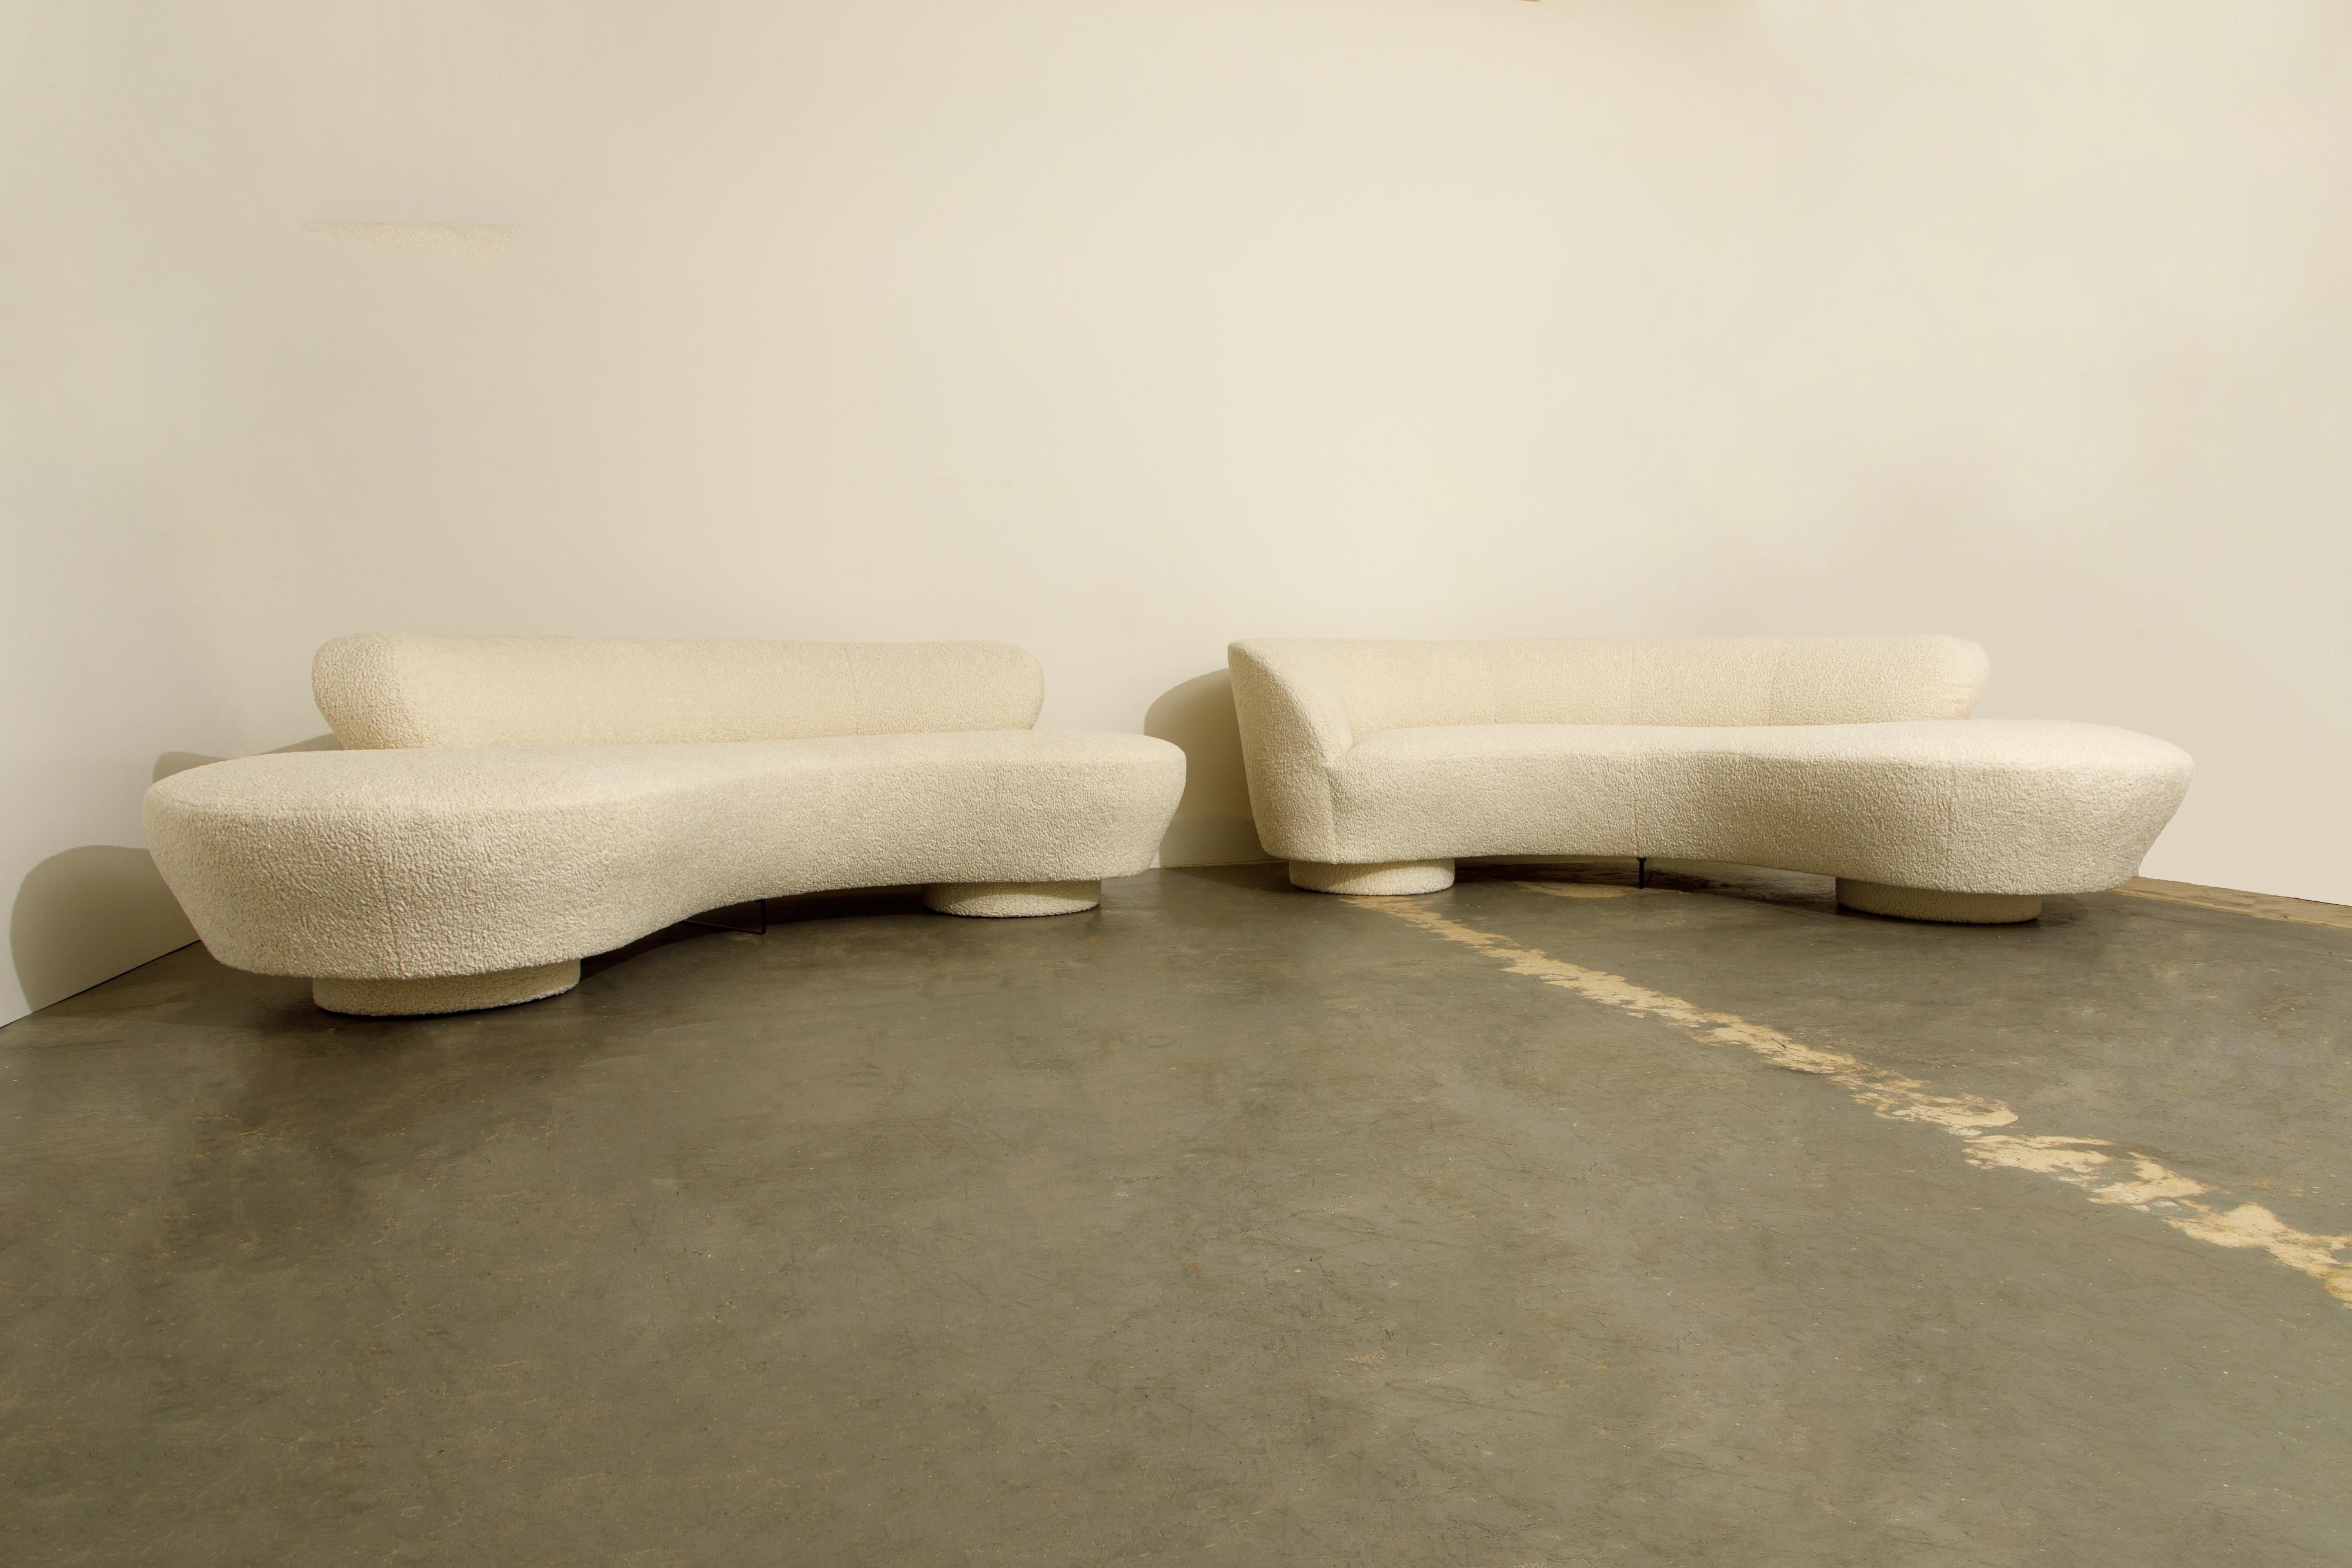 This spectacular pair of Vladimir Kagan 'Cloud' sofas were produced by Directional in circa 1980 and were newly reupholstered in a gorgeous white nubby bouclé fabric, both sofas signed underneath with Directional labels. 

Kagan, inspired by his